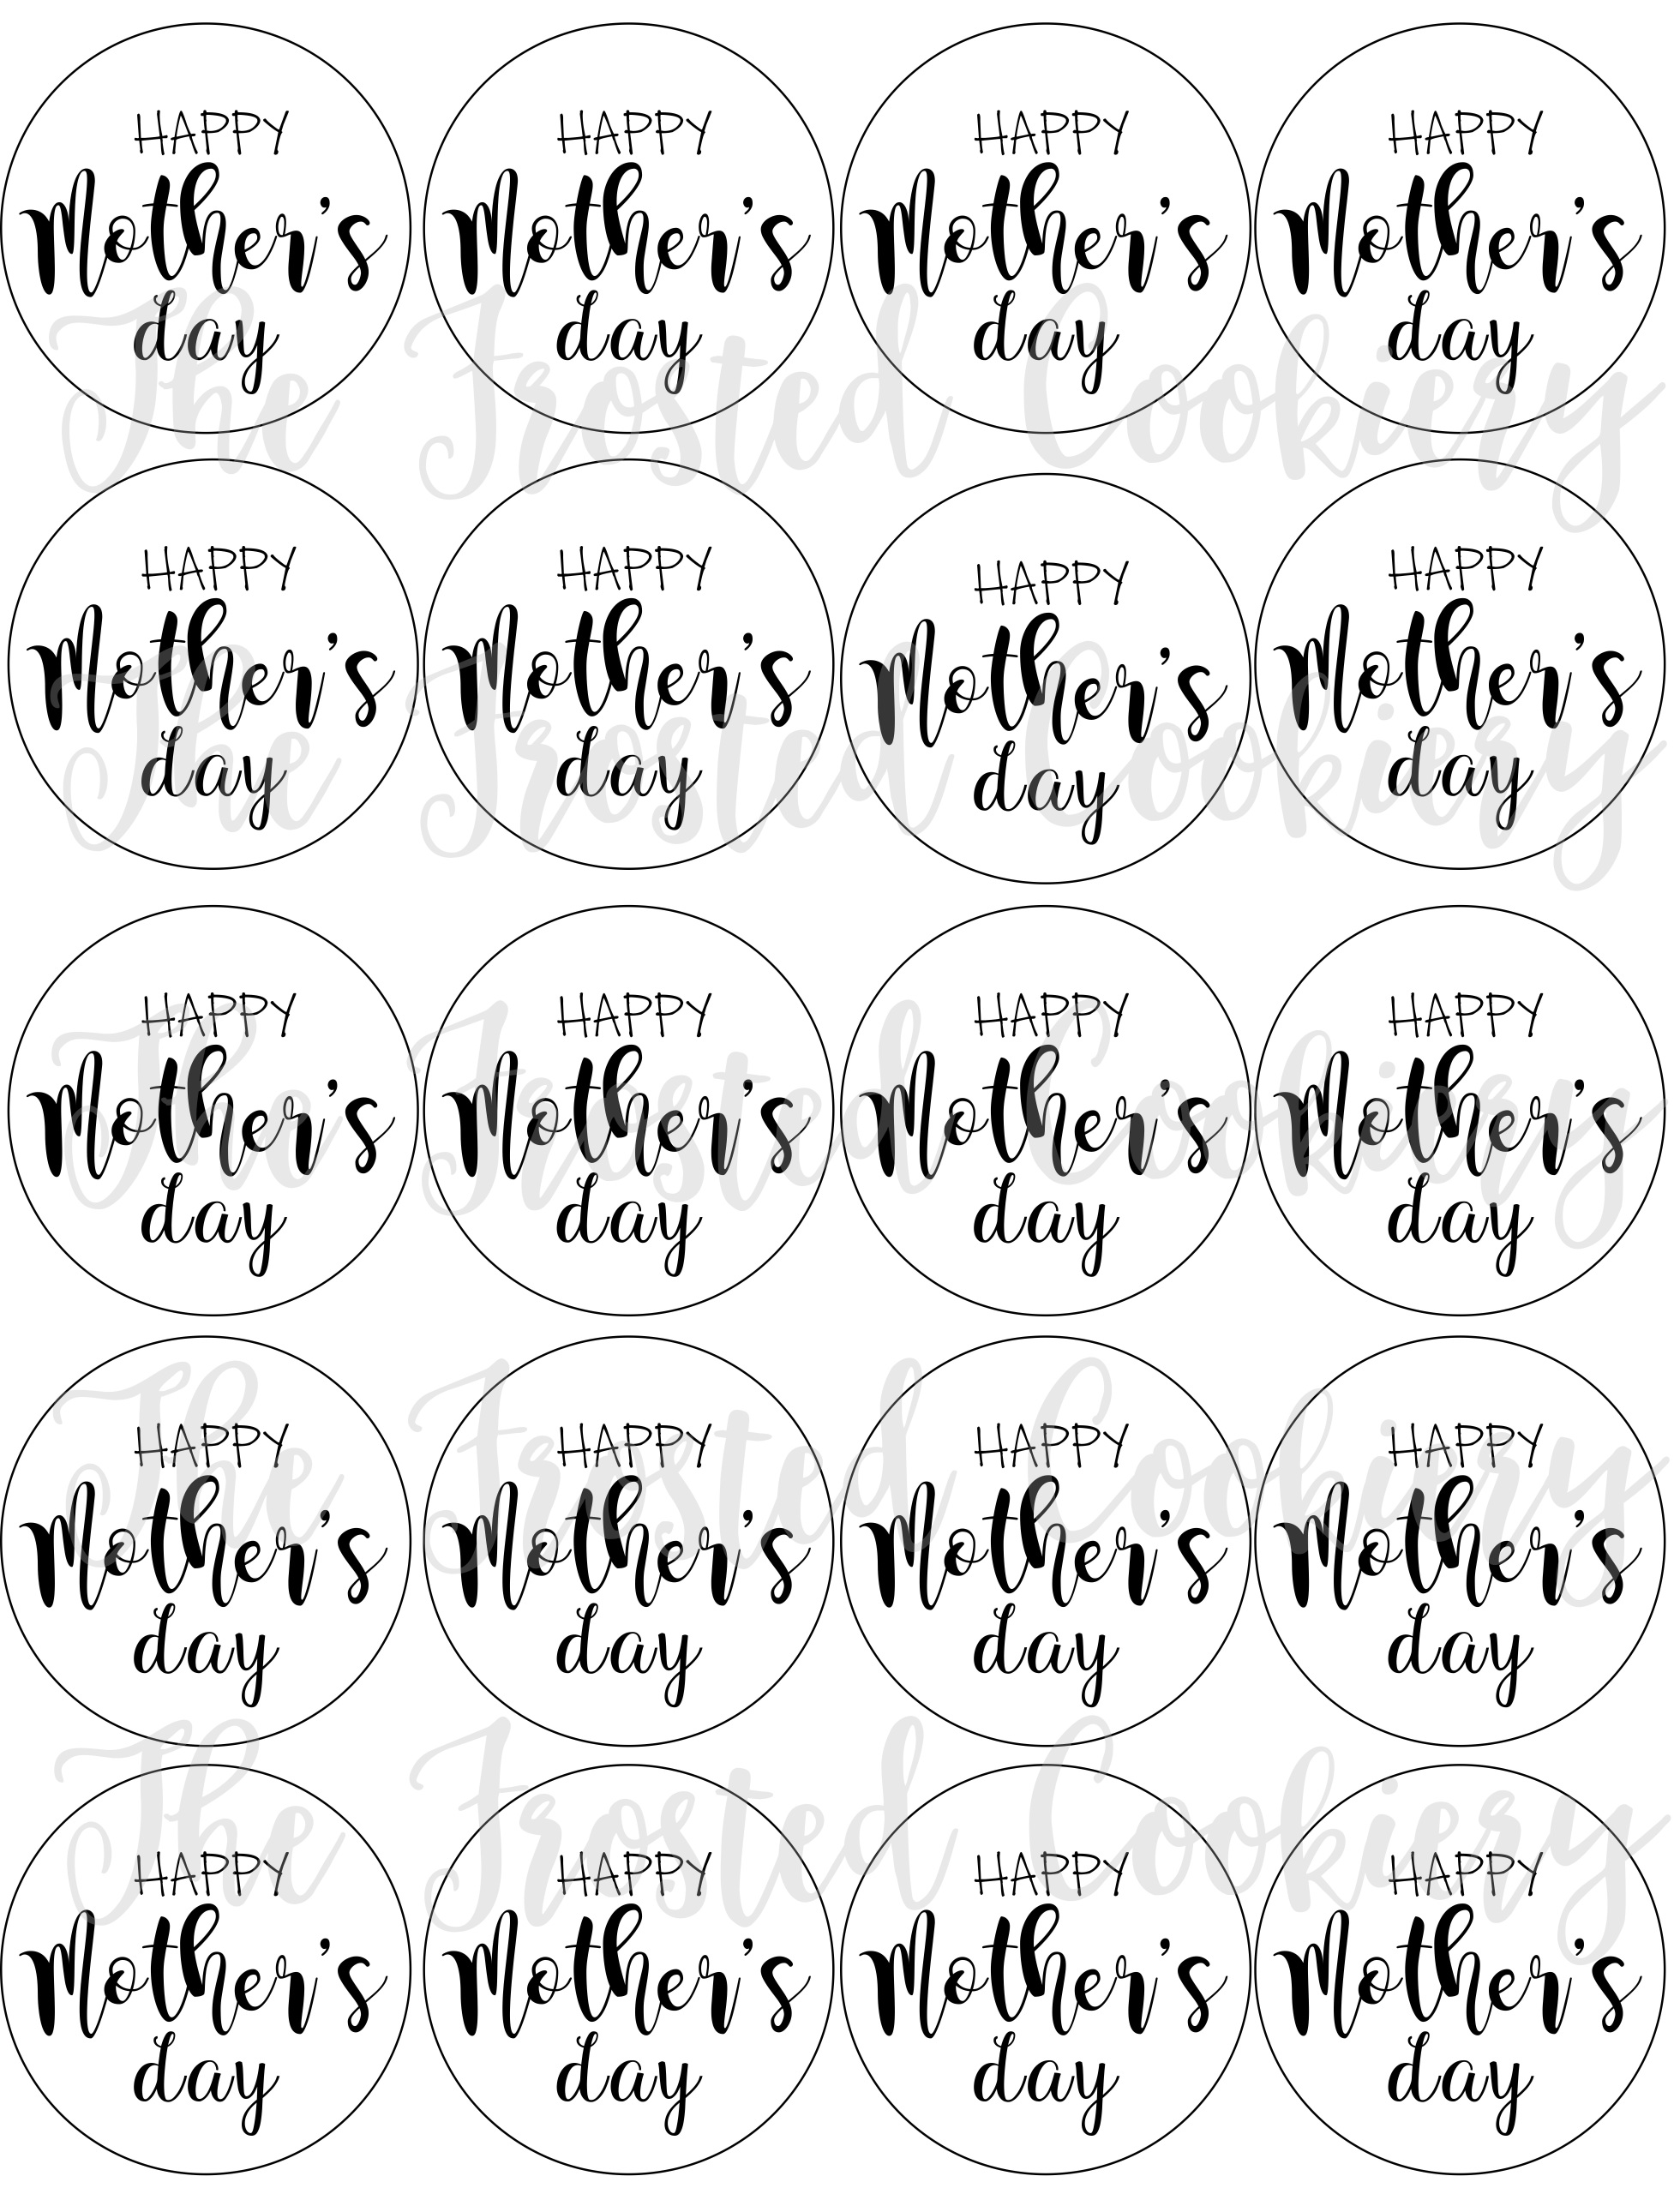 happy-mother-s-day-circle-tags